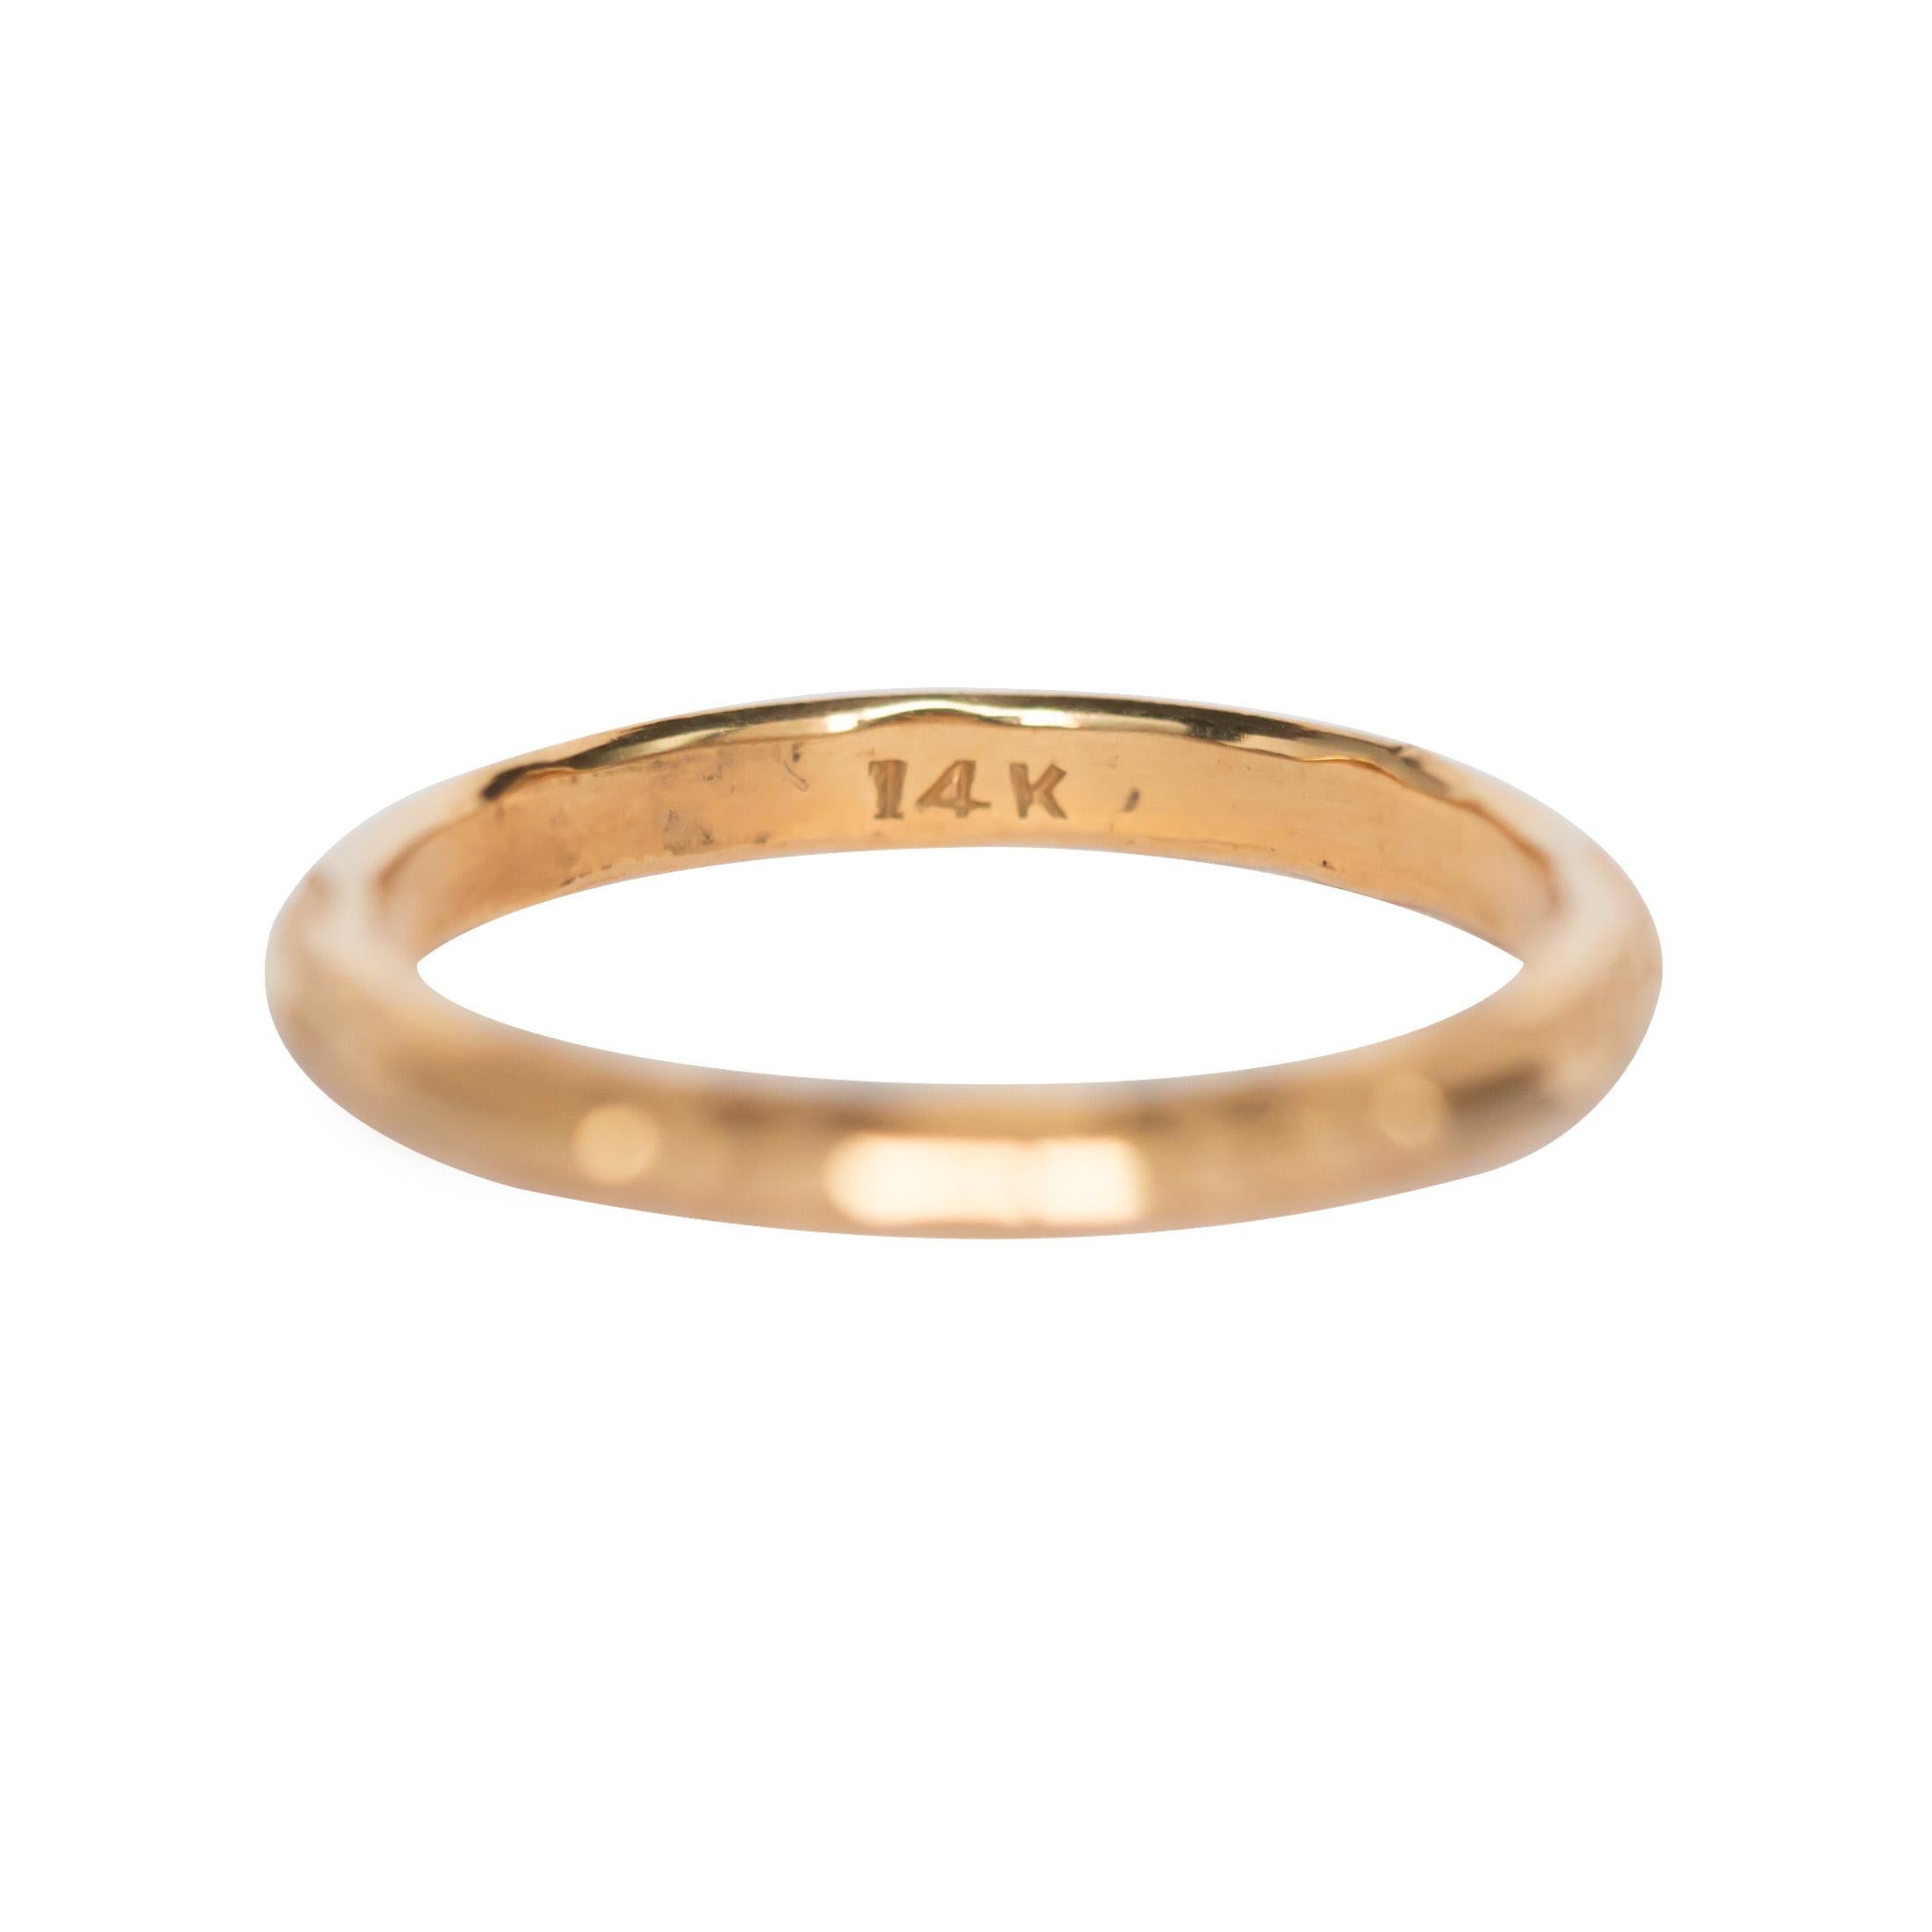 Ring Size: 5.95
Metal Type: 14 karat Yellow Gold 
Weight: 1.9 grams


Finger to Top of Stone Measurement: 1.55mm
Width: 2.55mm